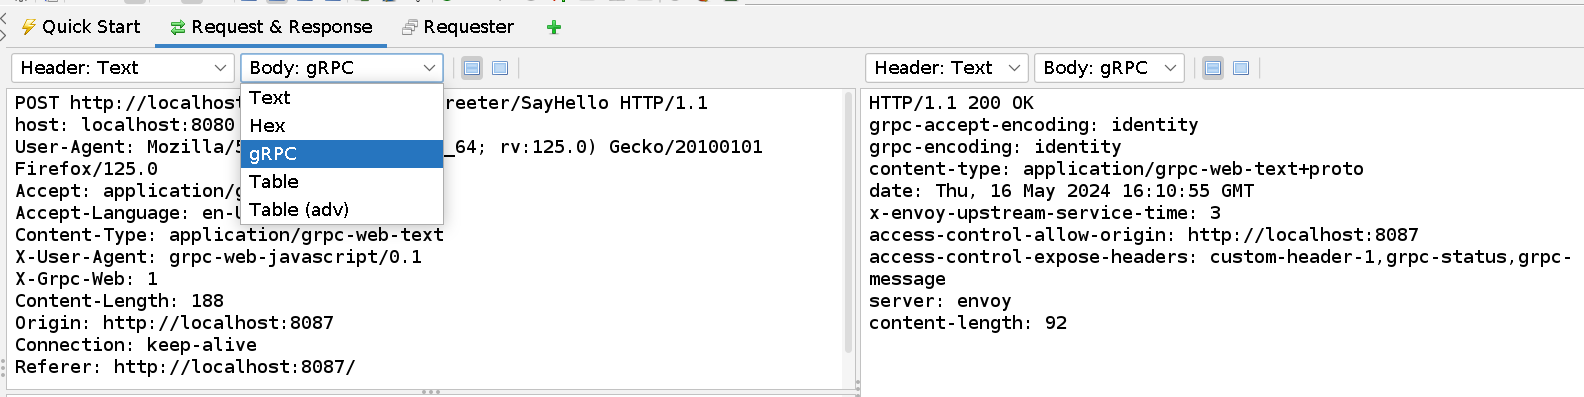 Displaying a gRPC decoded message